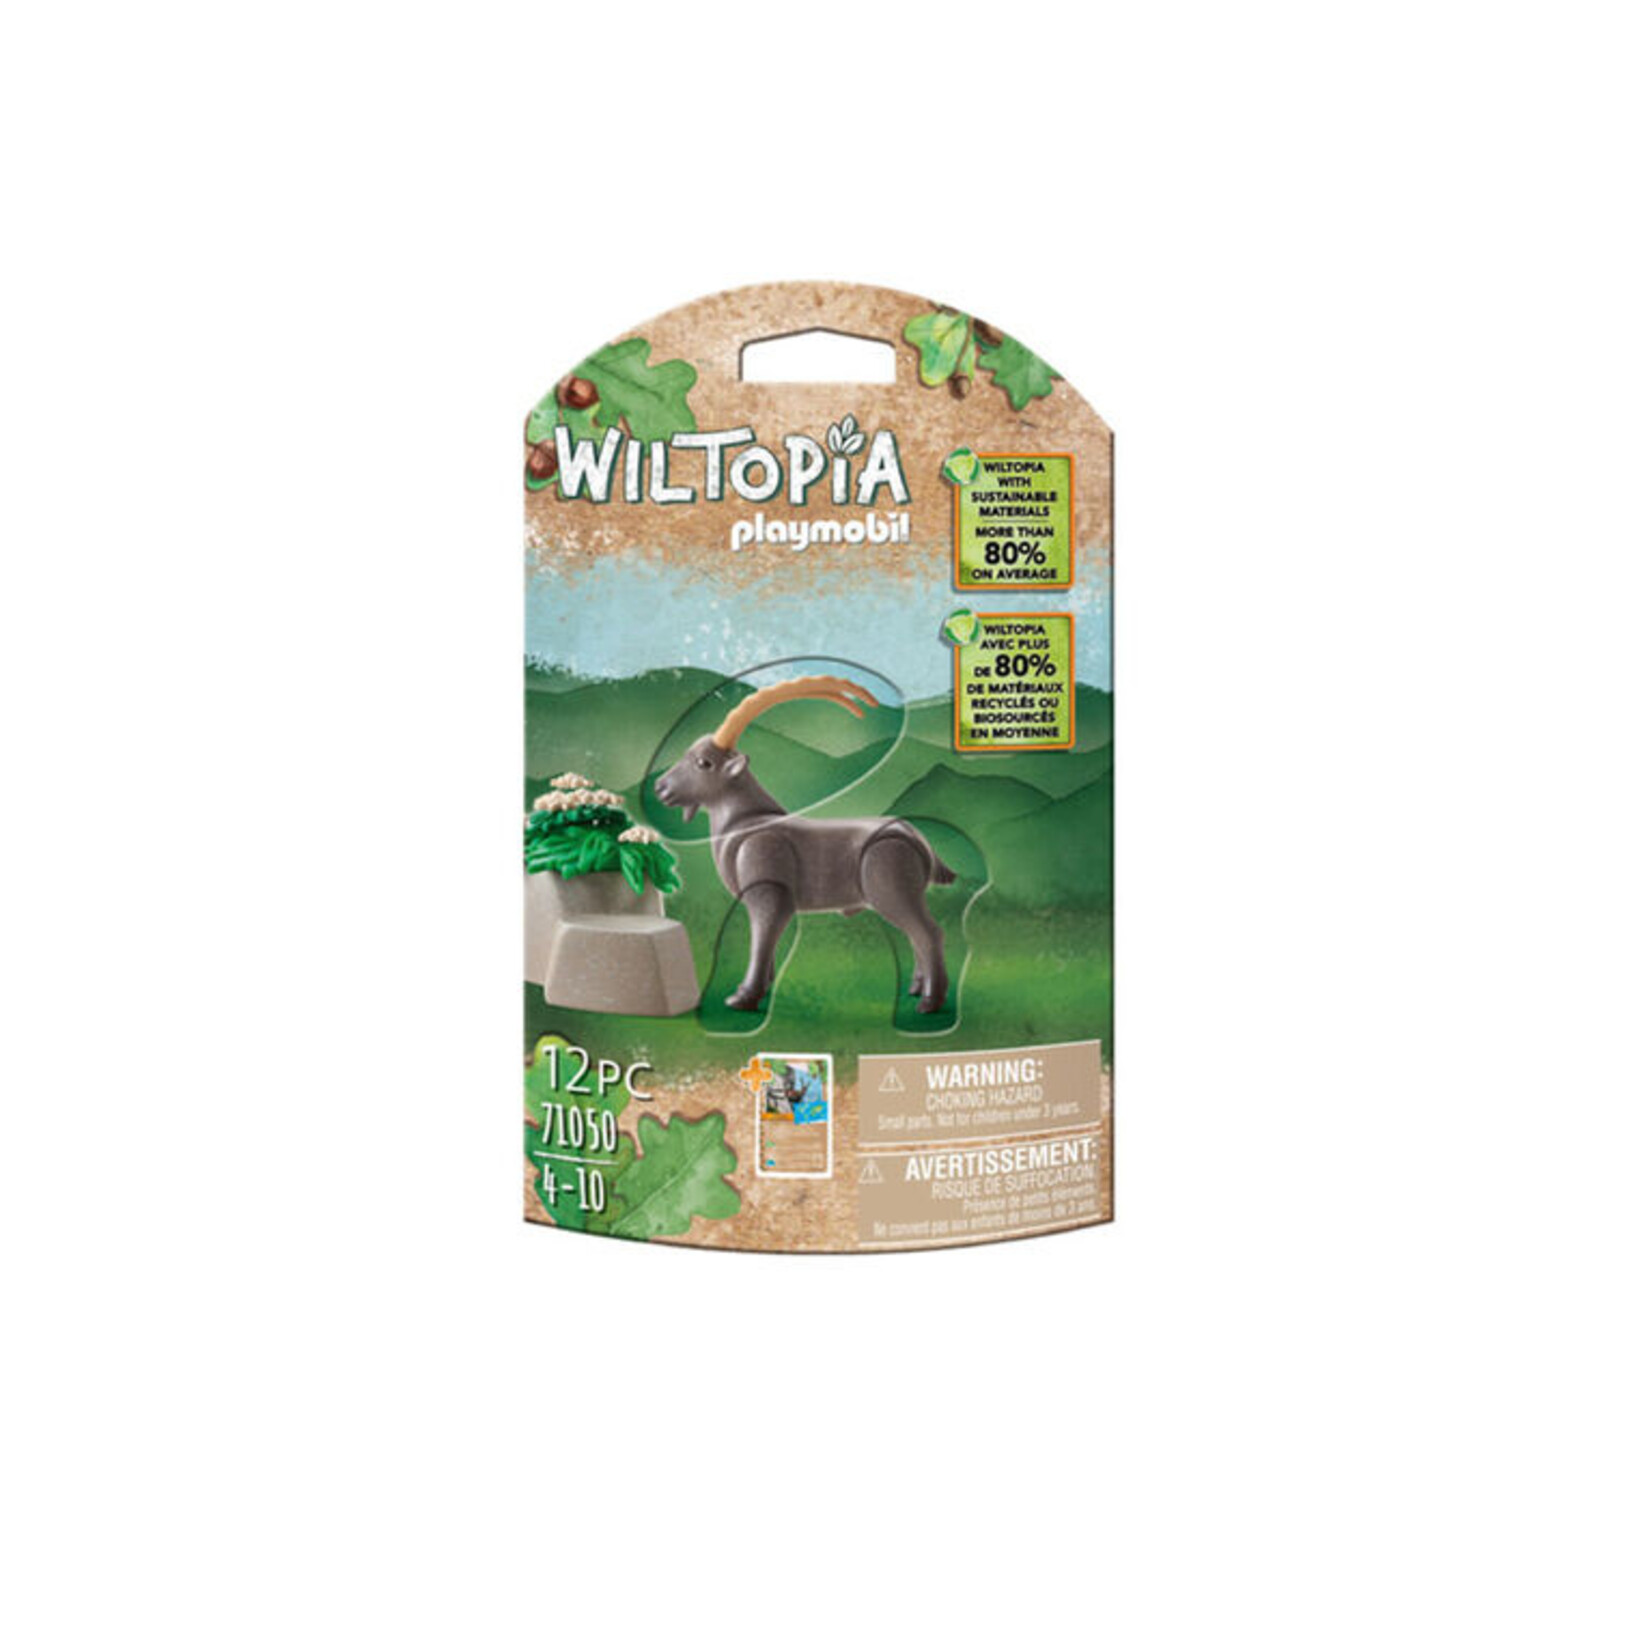 Playmobil unboxing : Wiltopia, the collectible animals (2022